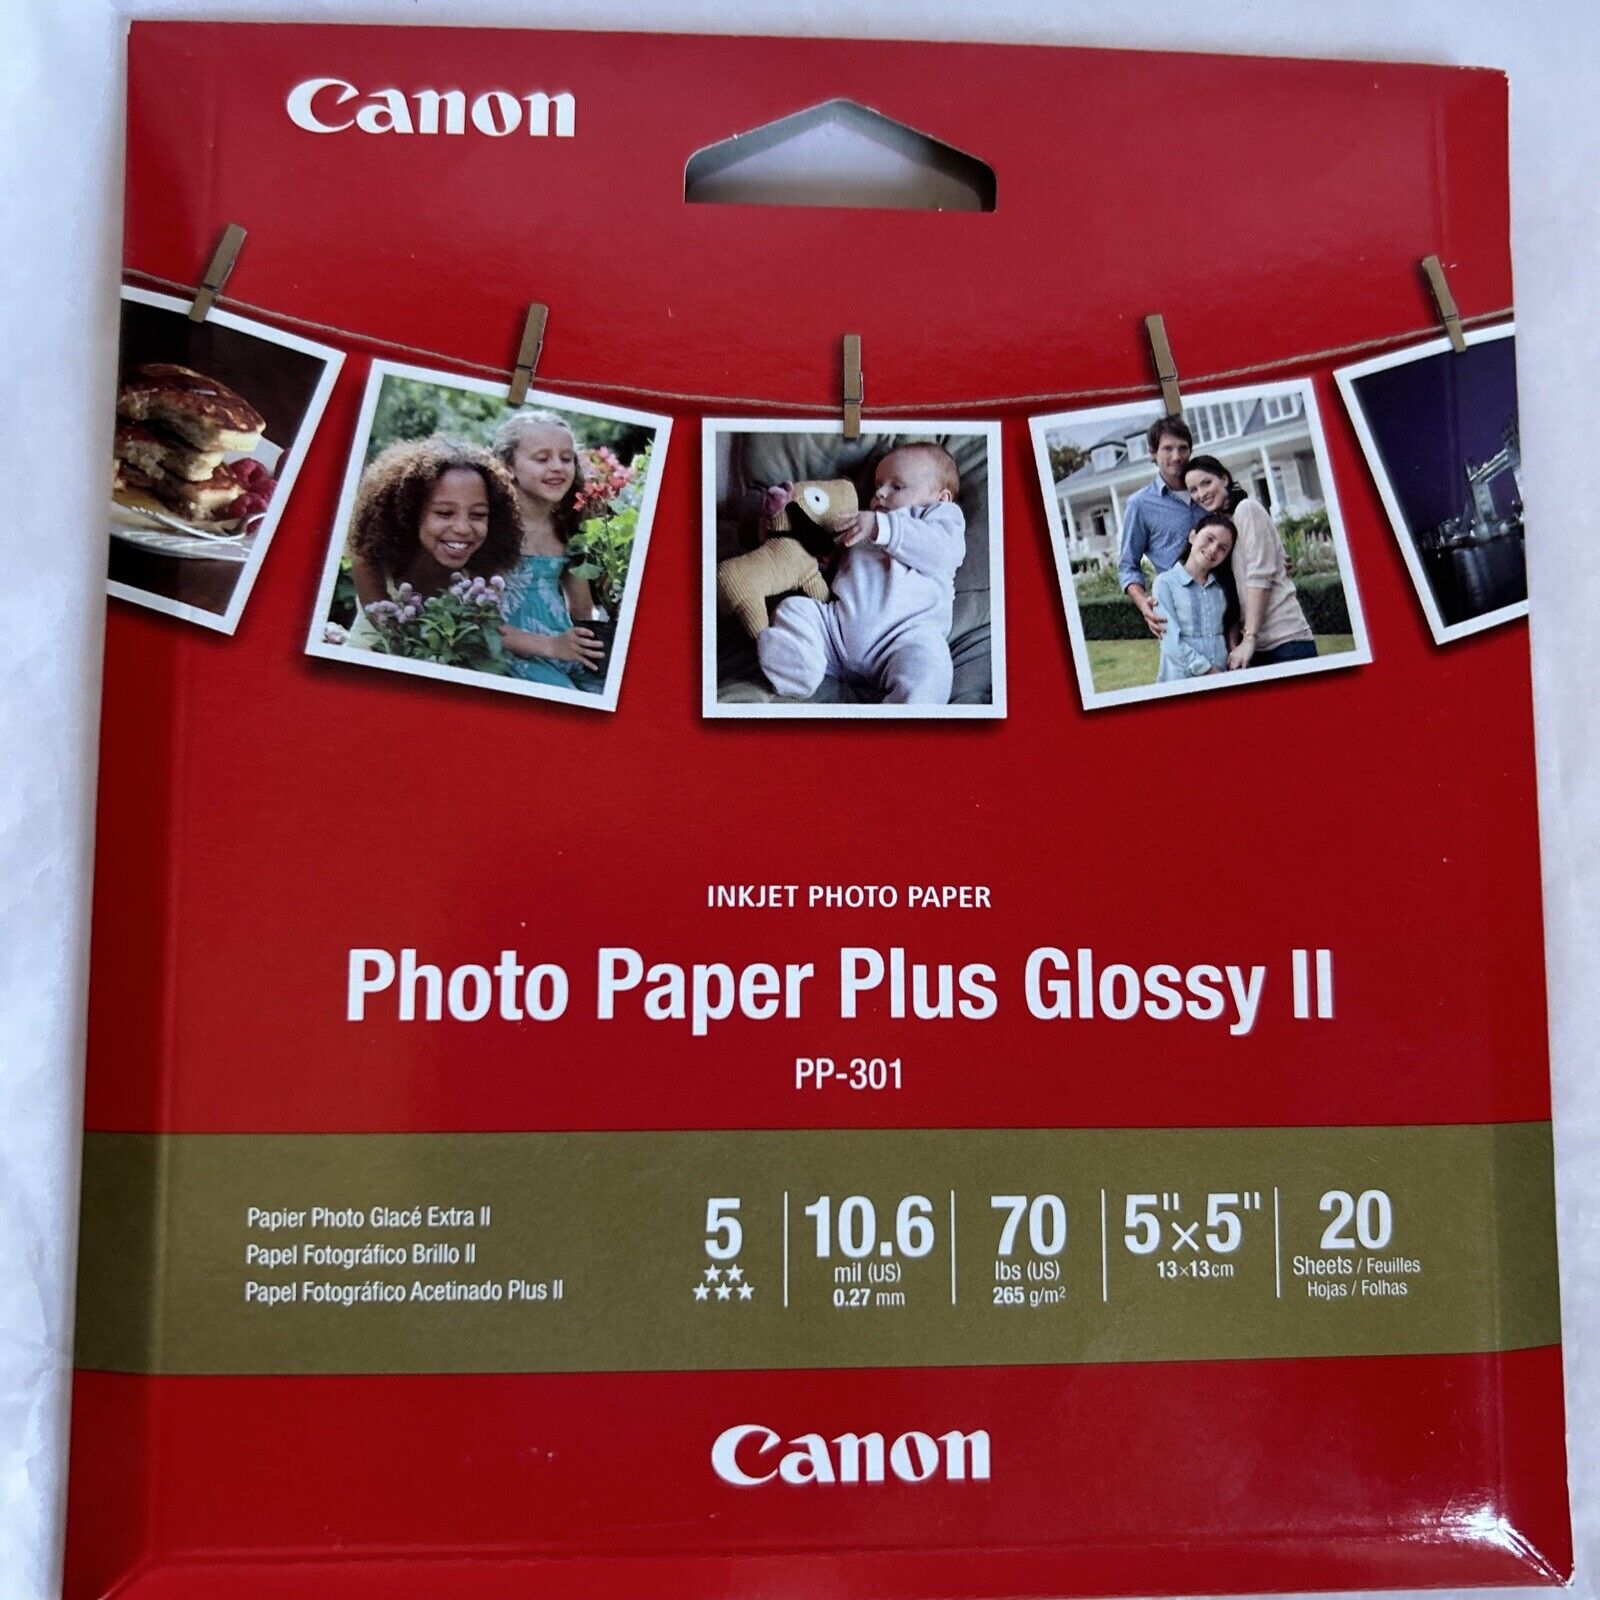 Canon Photo Paper Plus Glossy II 5x5” 20 Sheets PP-301 10.6 Mil 70 Lbs Inkjet